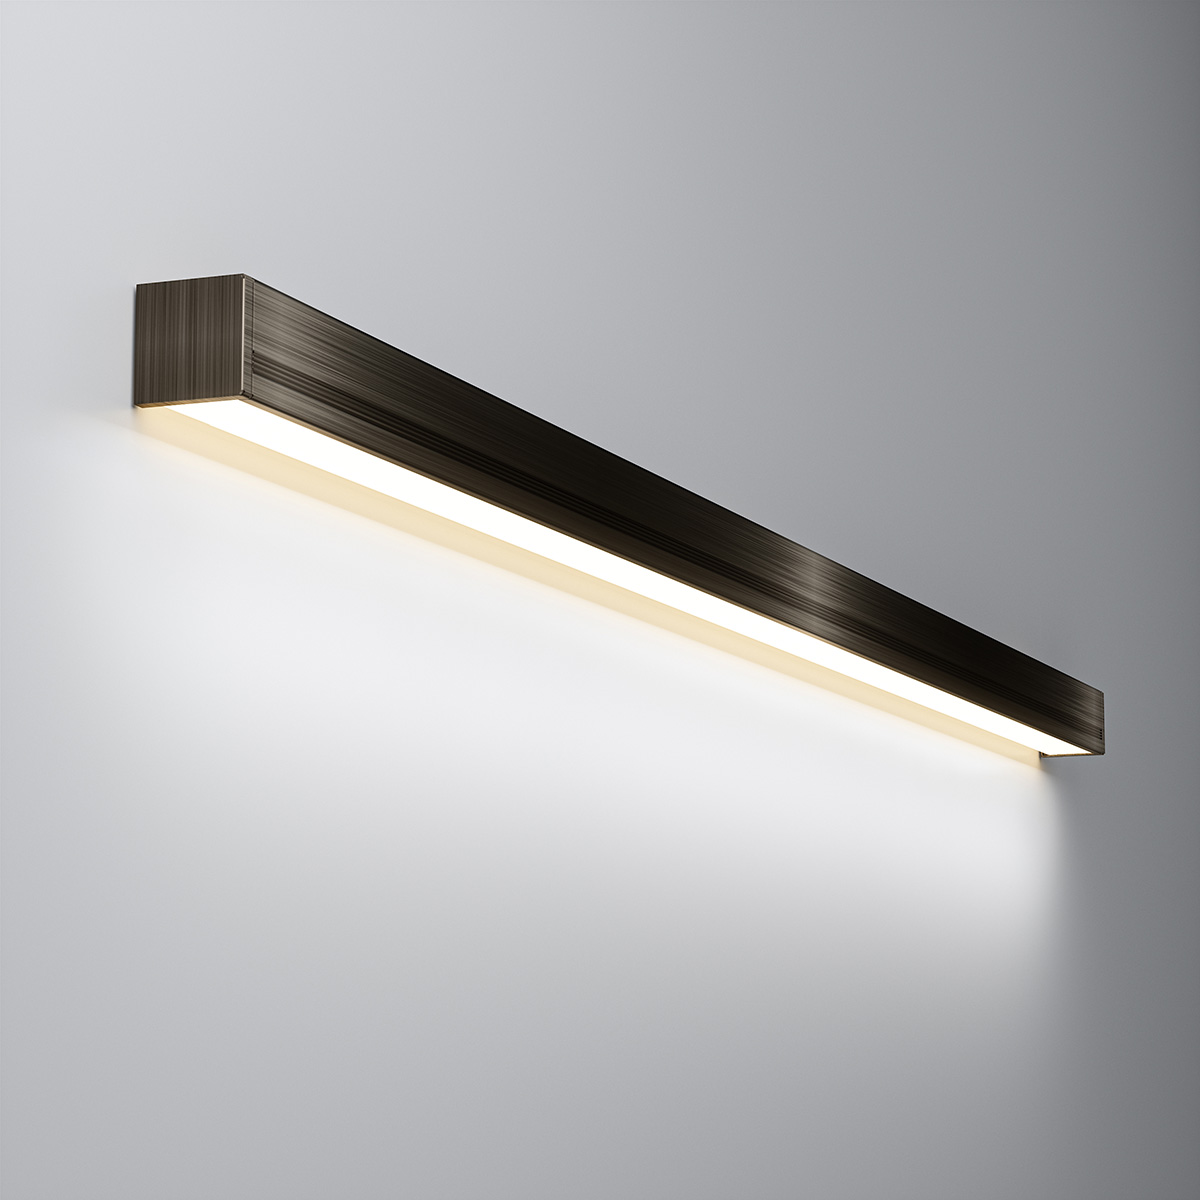 Outdoor linear egress lighting with wall wash light output. 